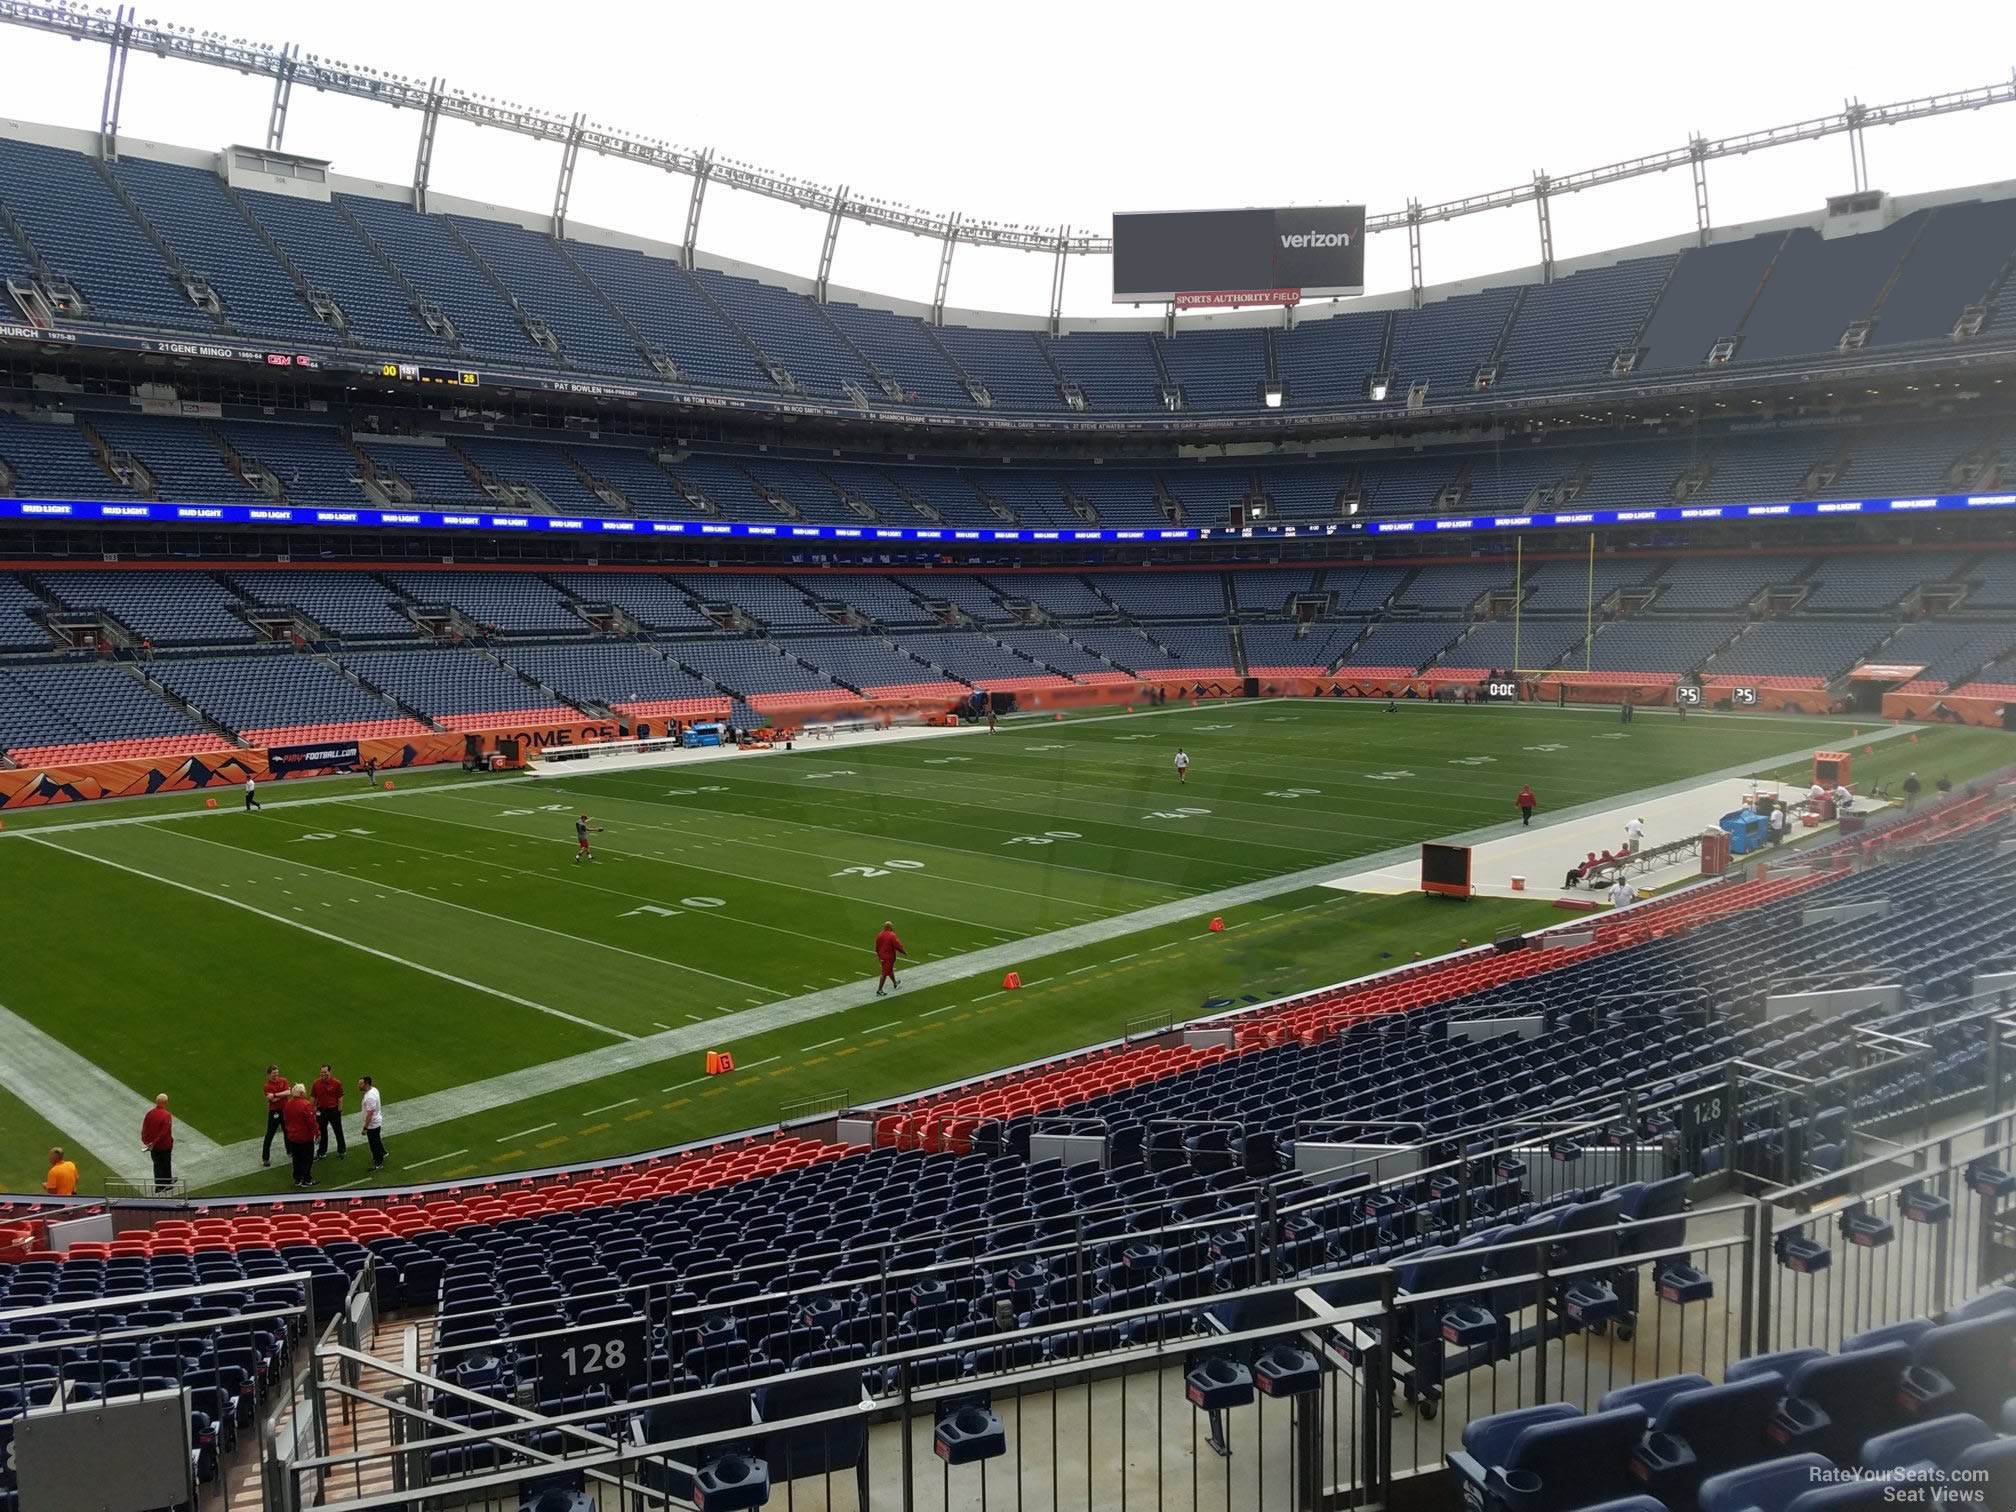 section 128, row 30 seat view  - empower field (at mile high)